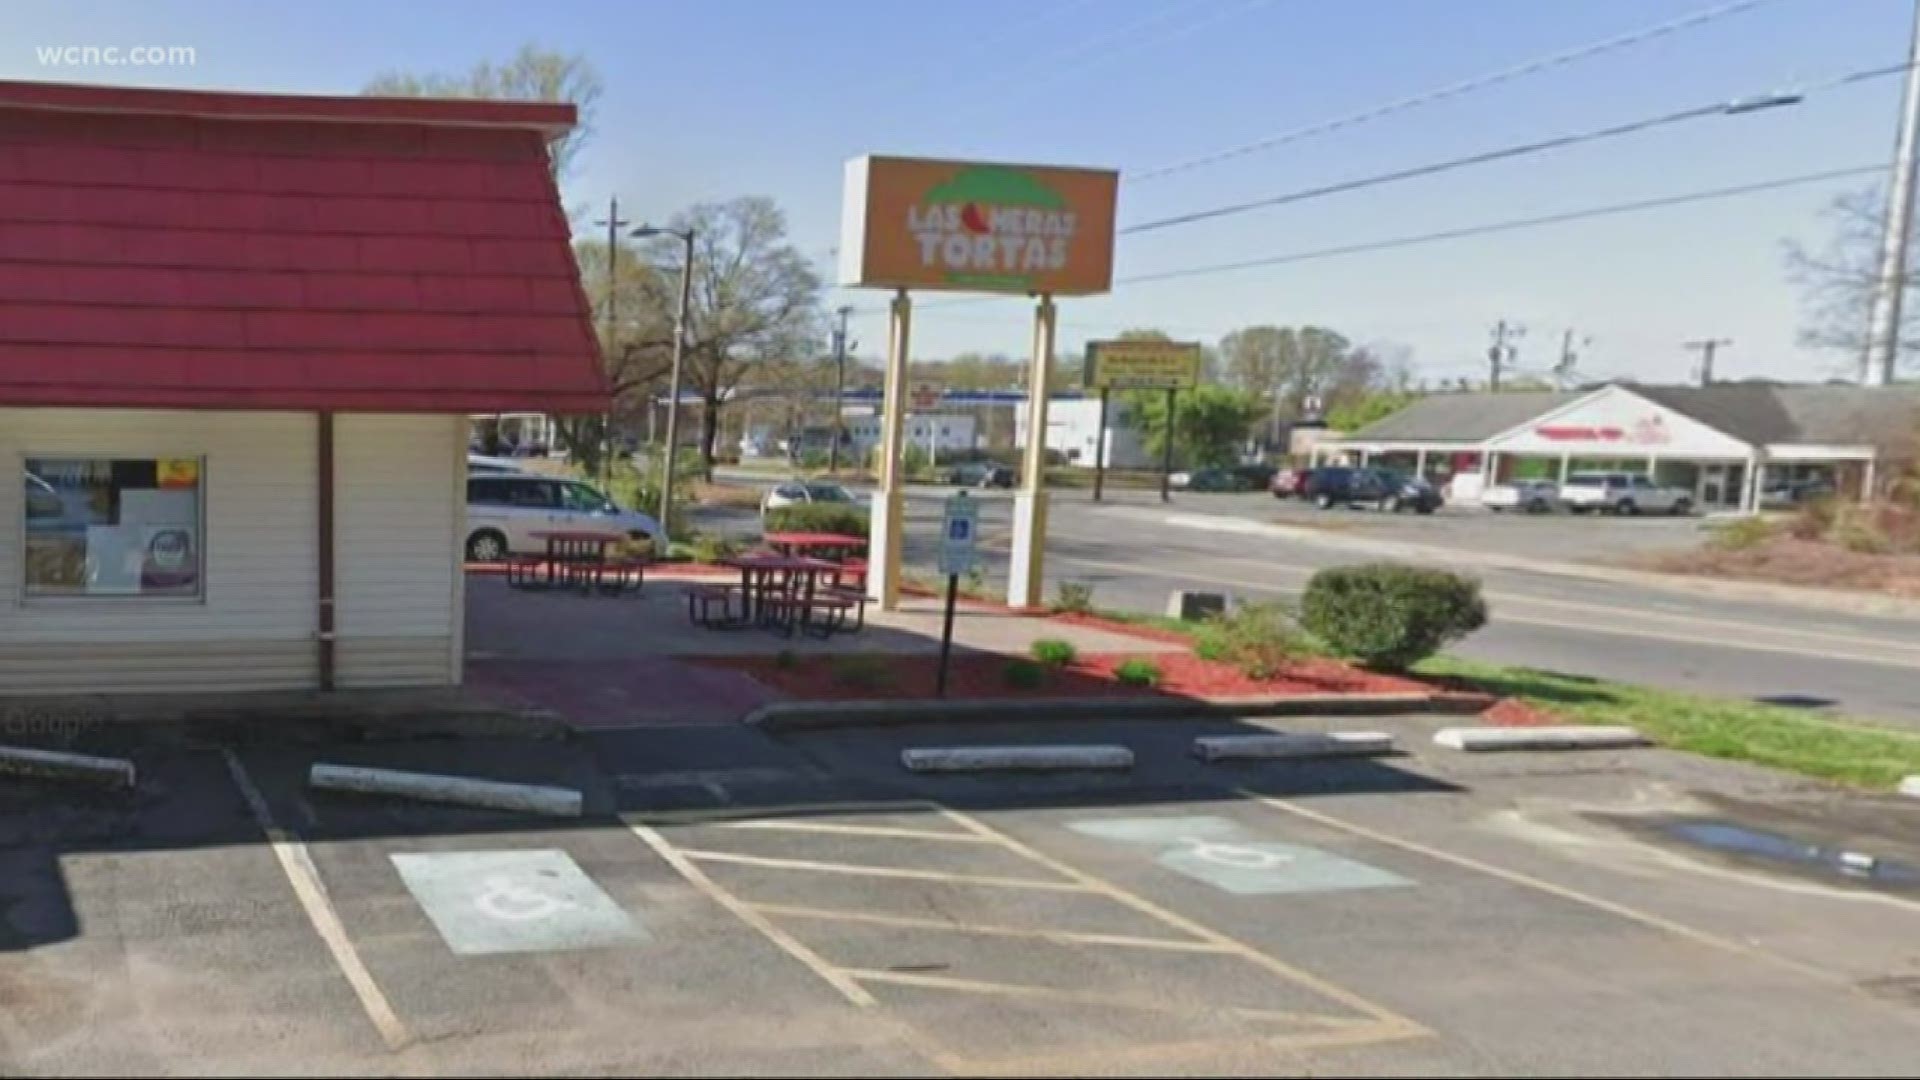 A north Charlotte restaurant landed on this week's restaurant report after the inspector noted they didn't have any soap at the hand-washing sink.